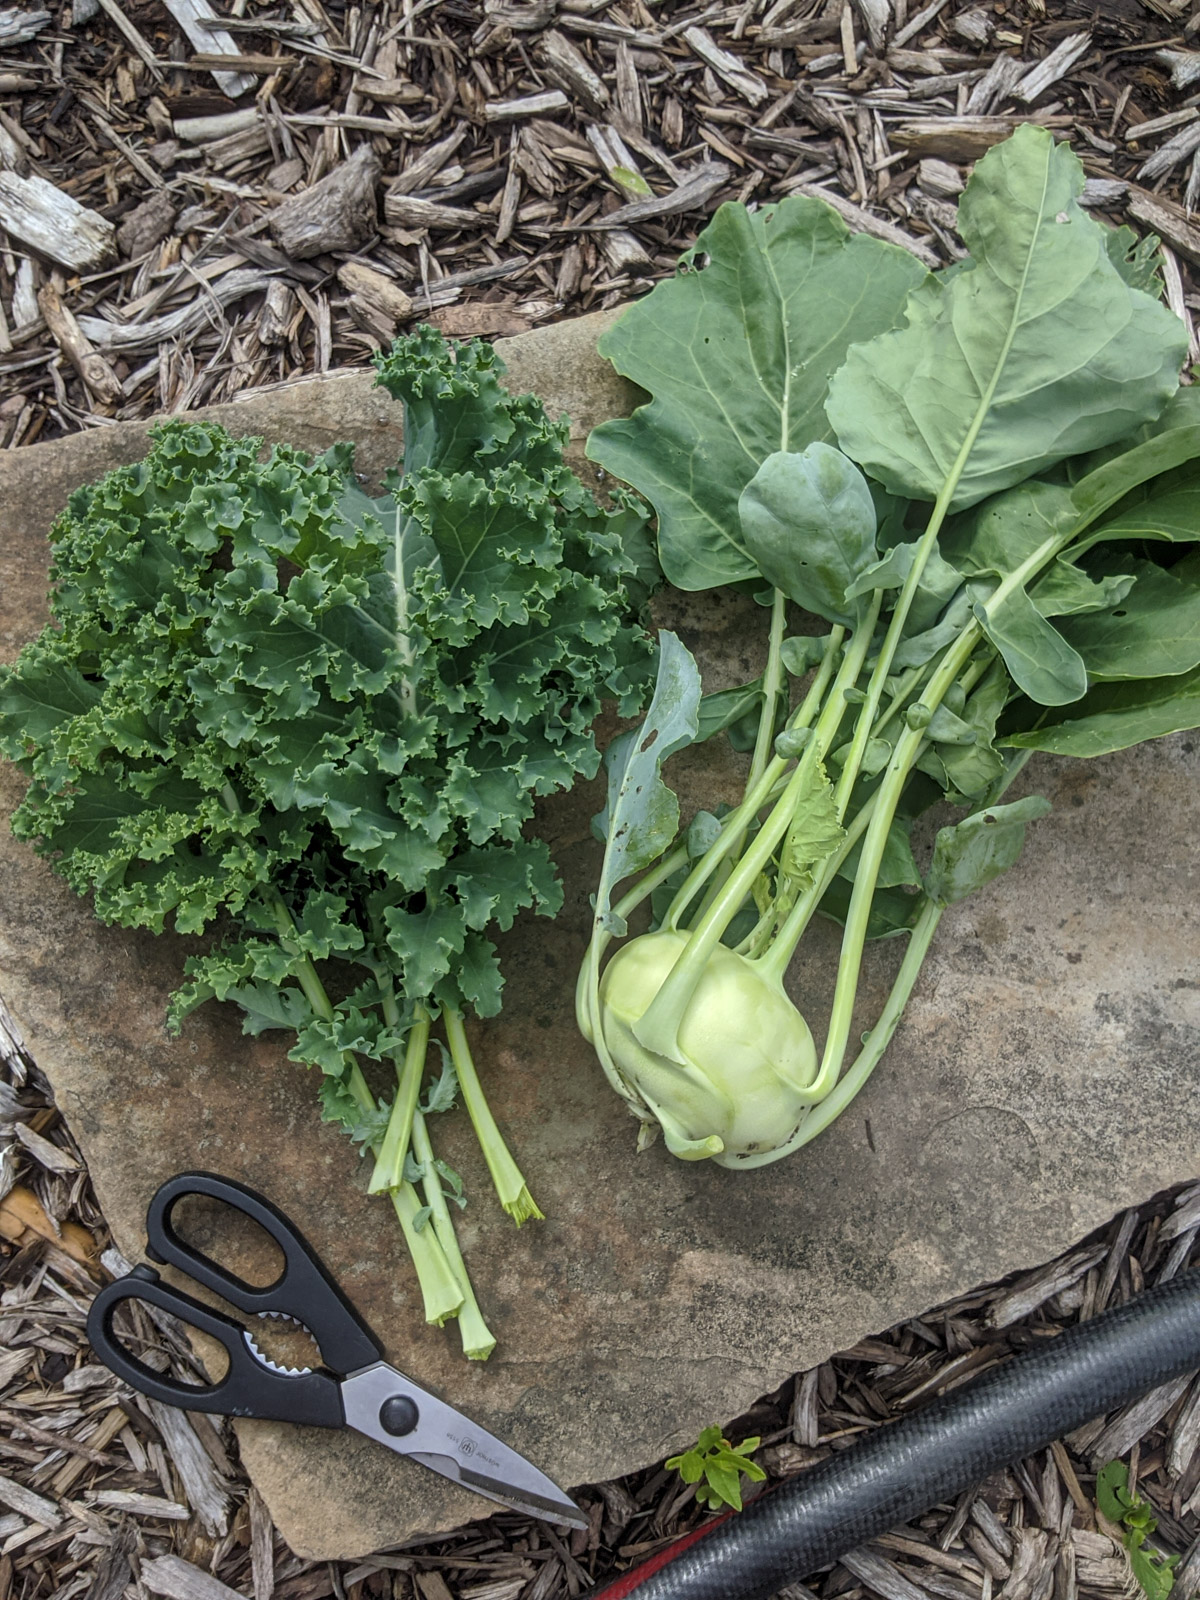 Harvested kale and kohlrabi laying on a flagstone rock with a pair of scissors.